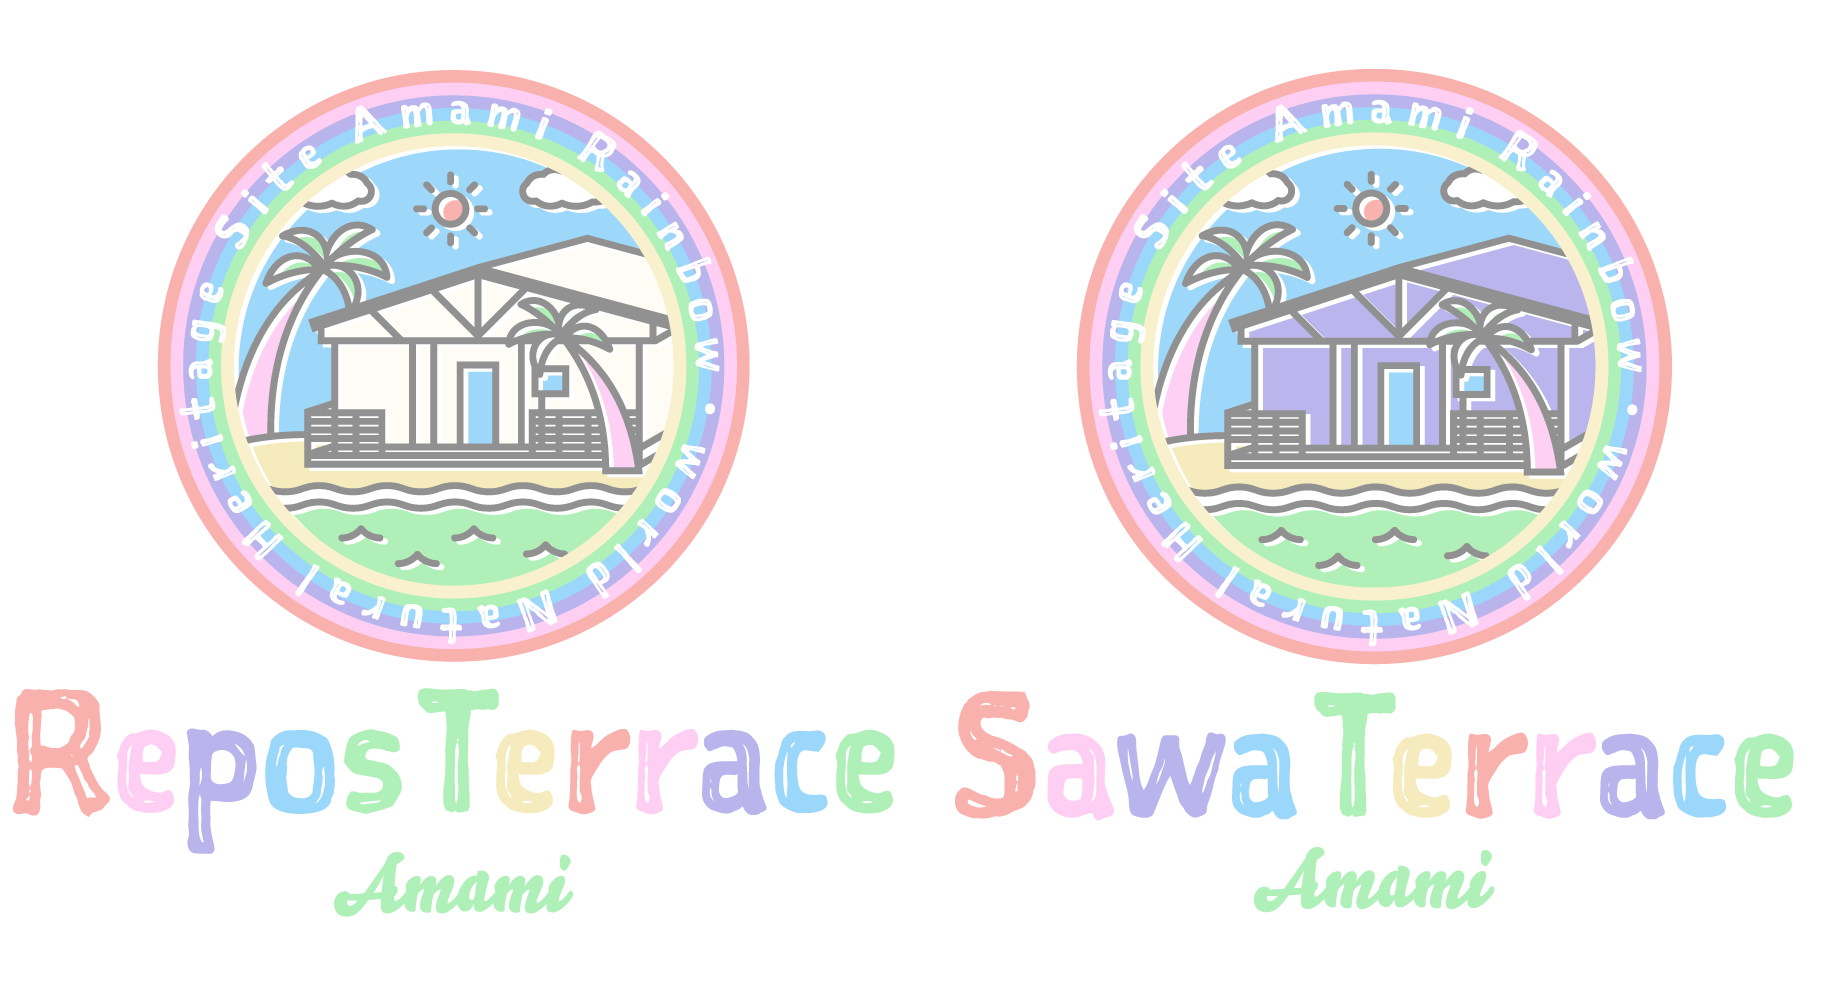 sawaterrace_and_reposterrace TerraceのQ&Aページ